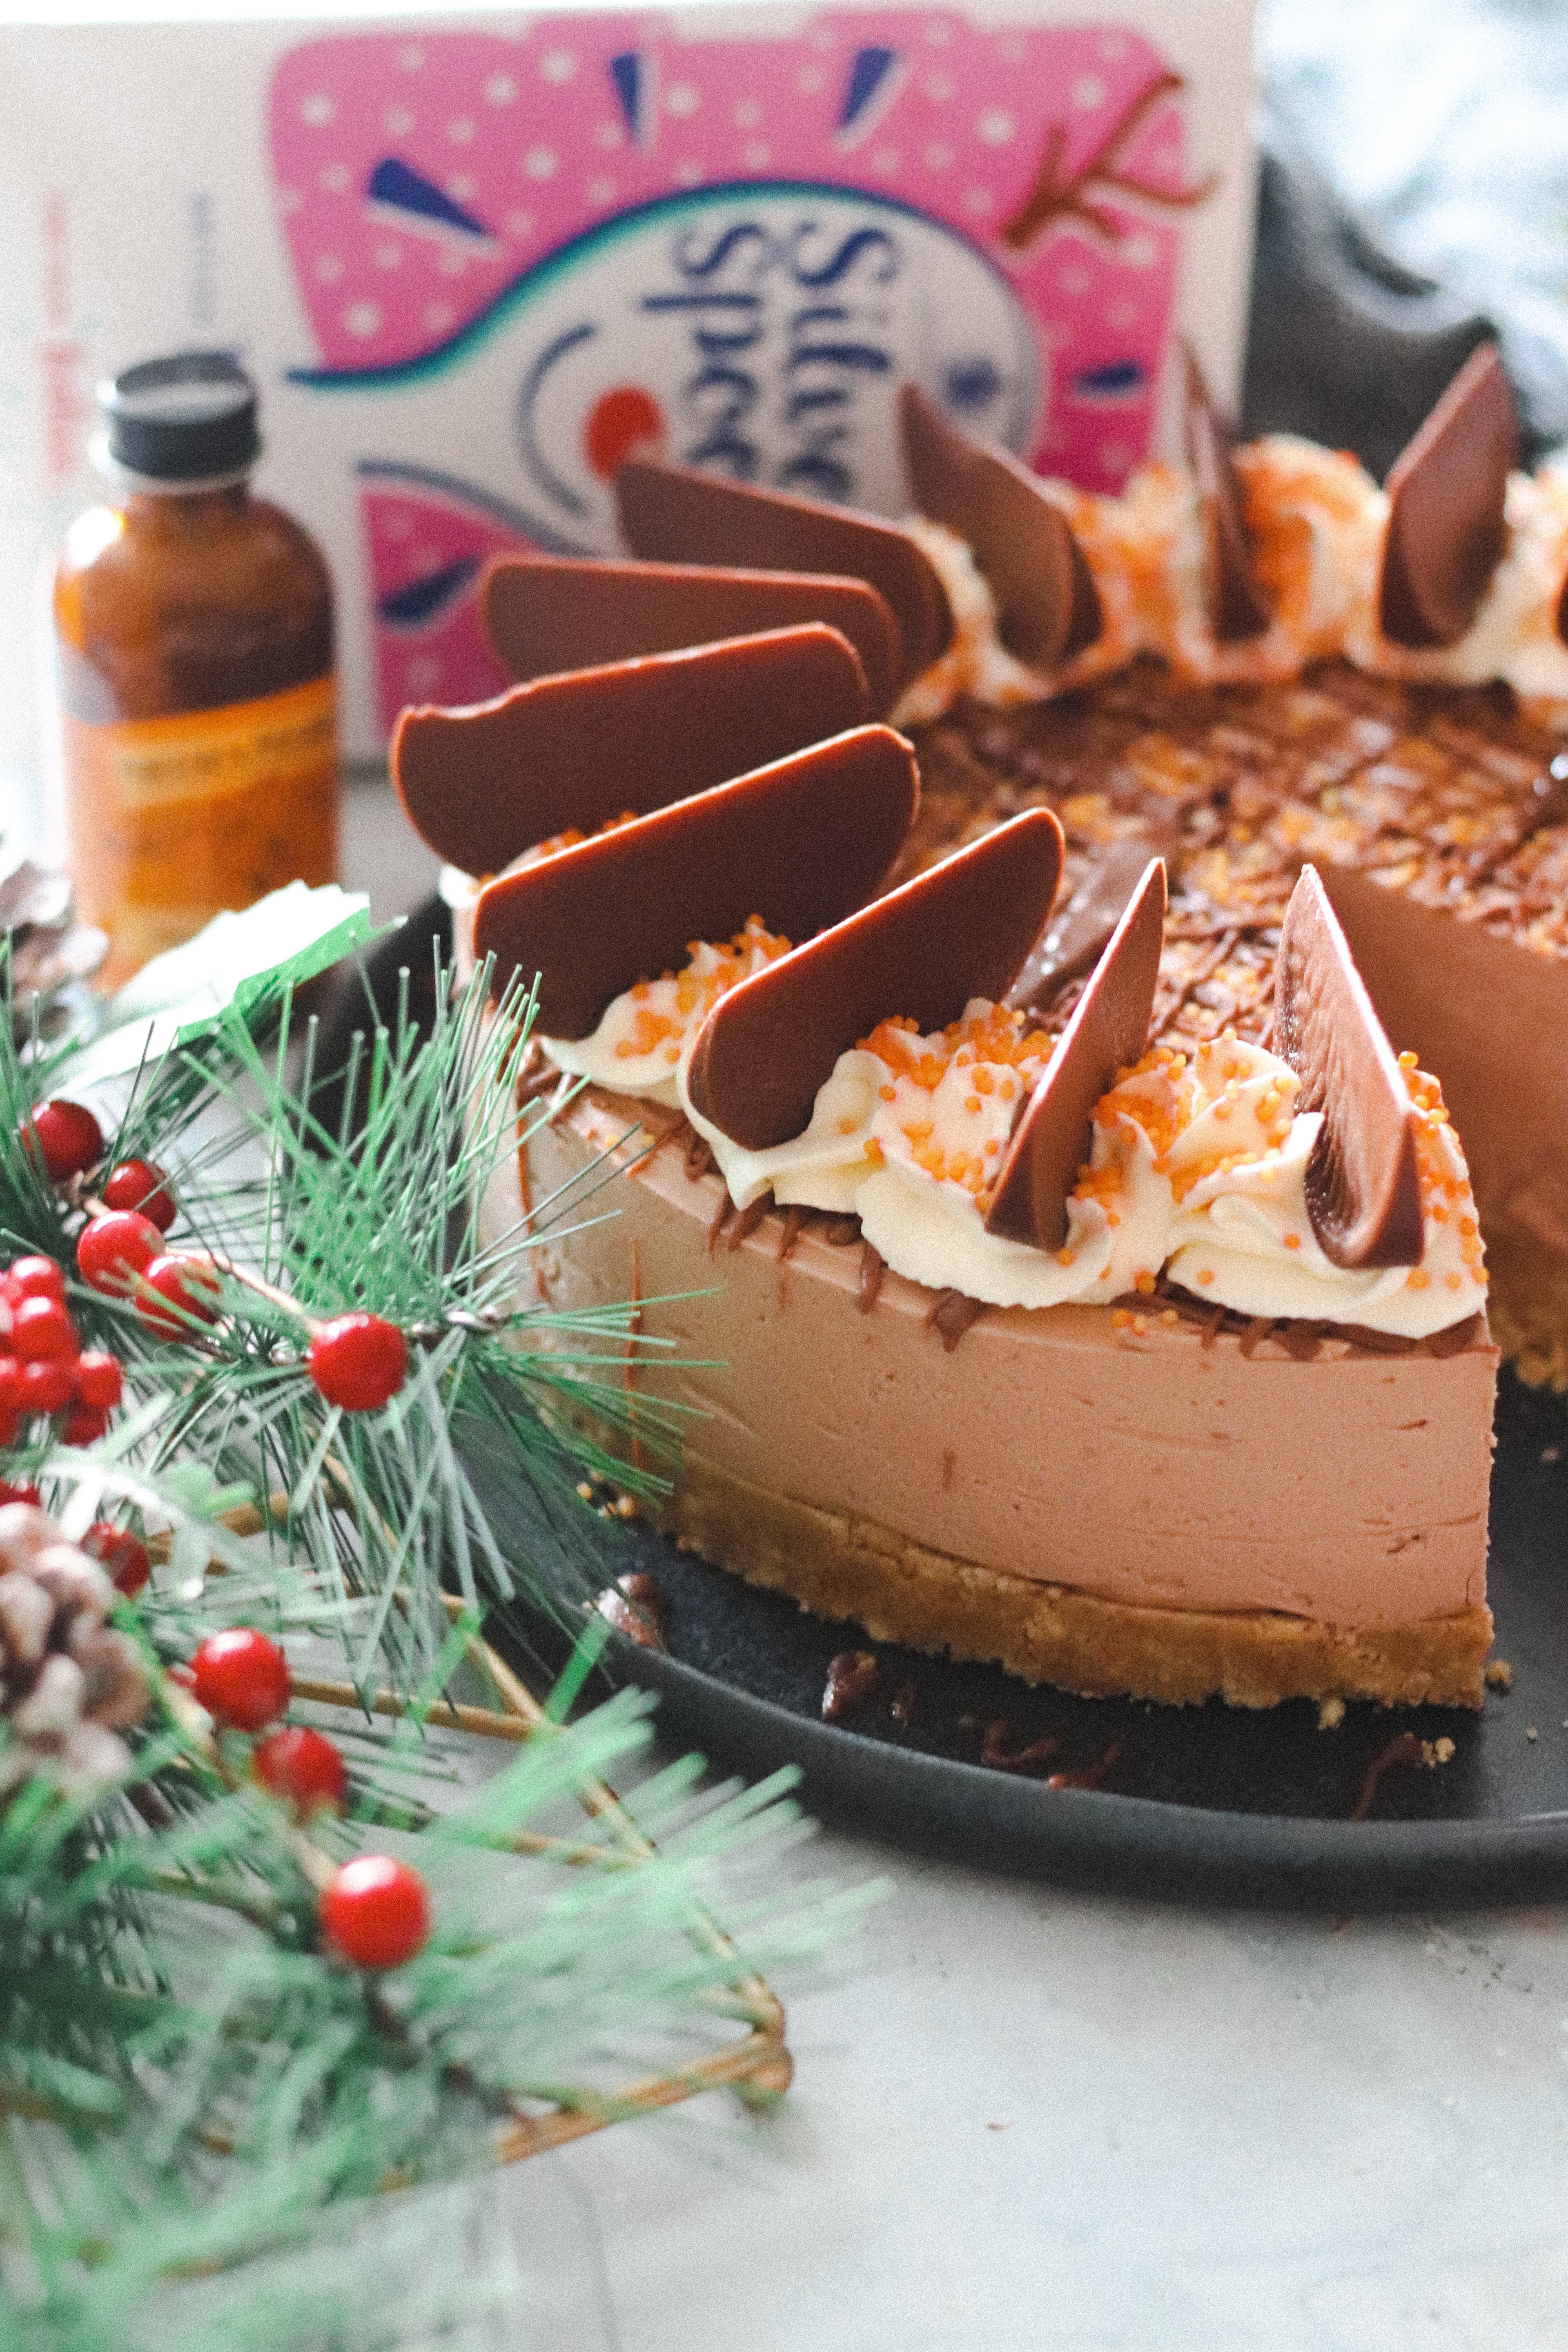 Close up of Chocolate Orange Cheesecake decorated with chocolate orange segments next to pine leaves, a box of Silver Spoon Icing Sugar and Nielsen-Massey Orange Extract